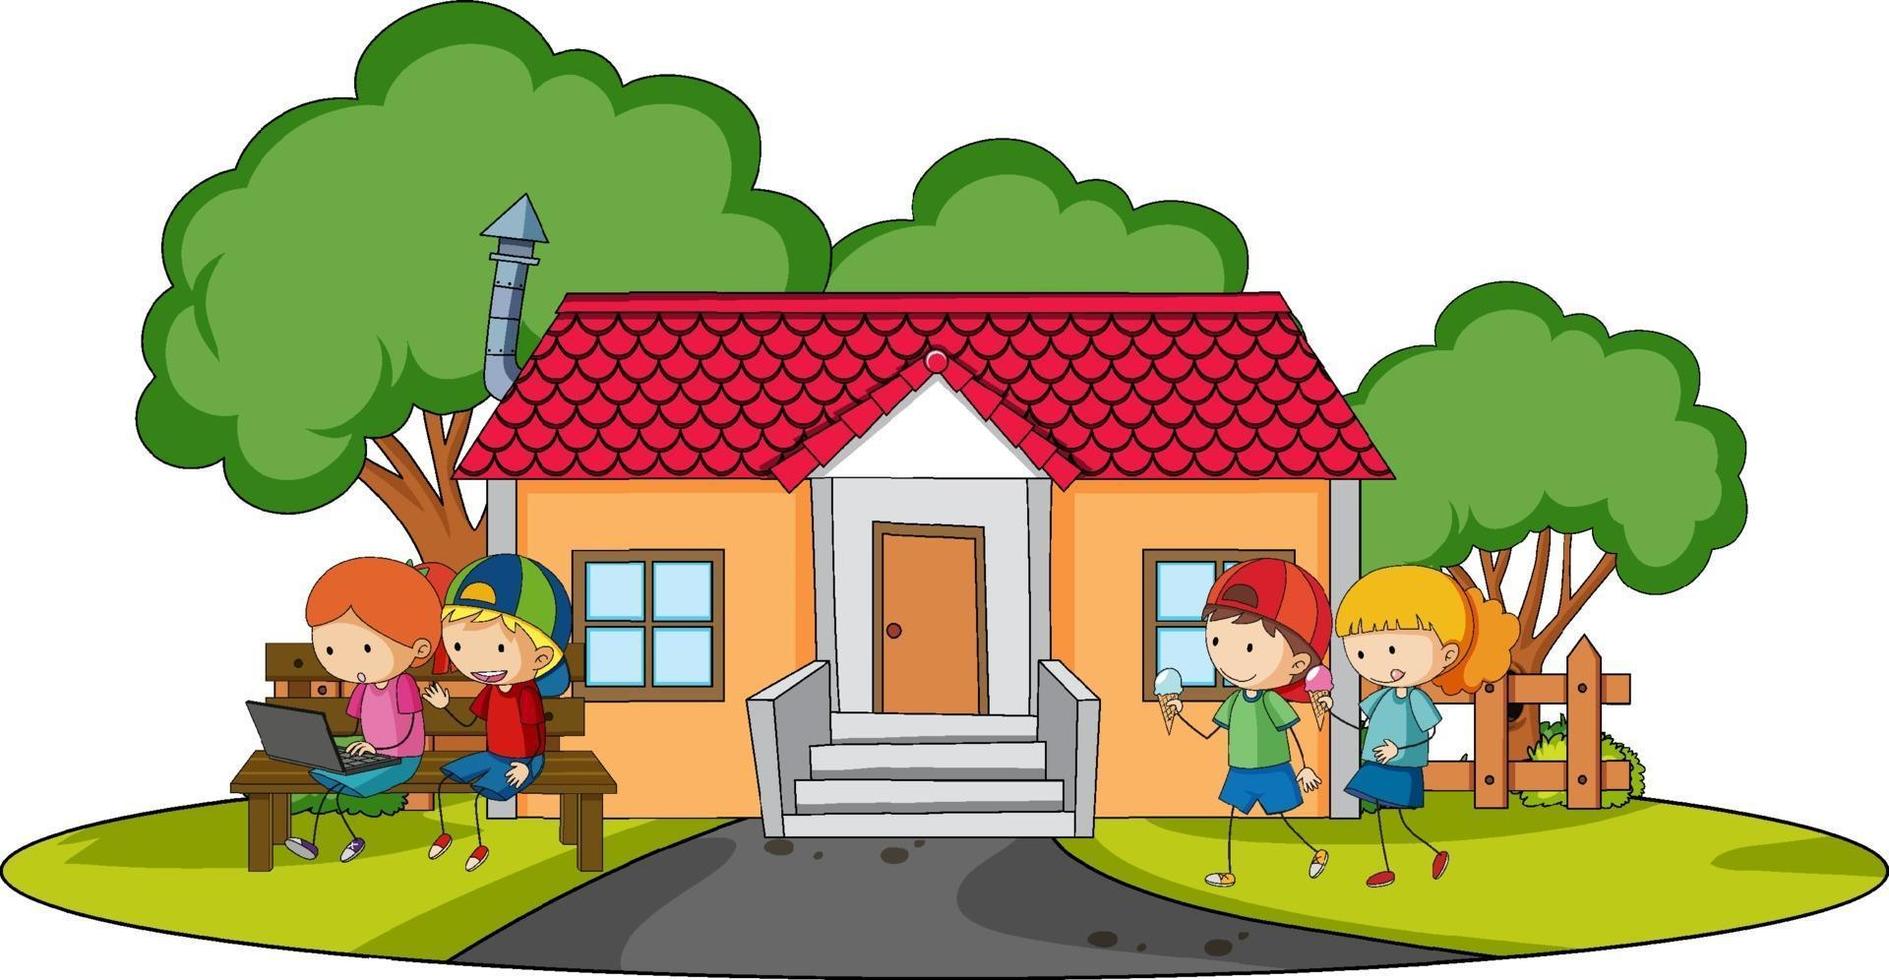 Front view of a house with many kids on white background vector